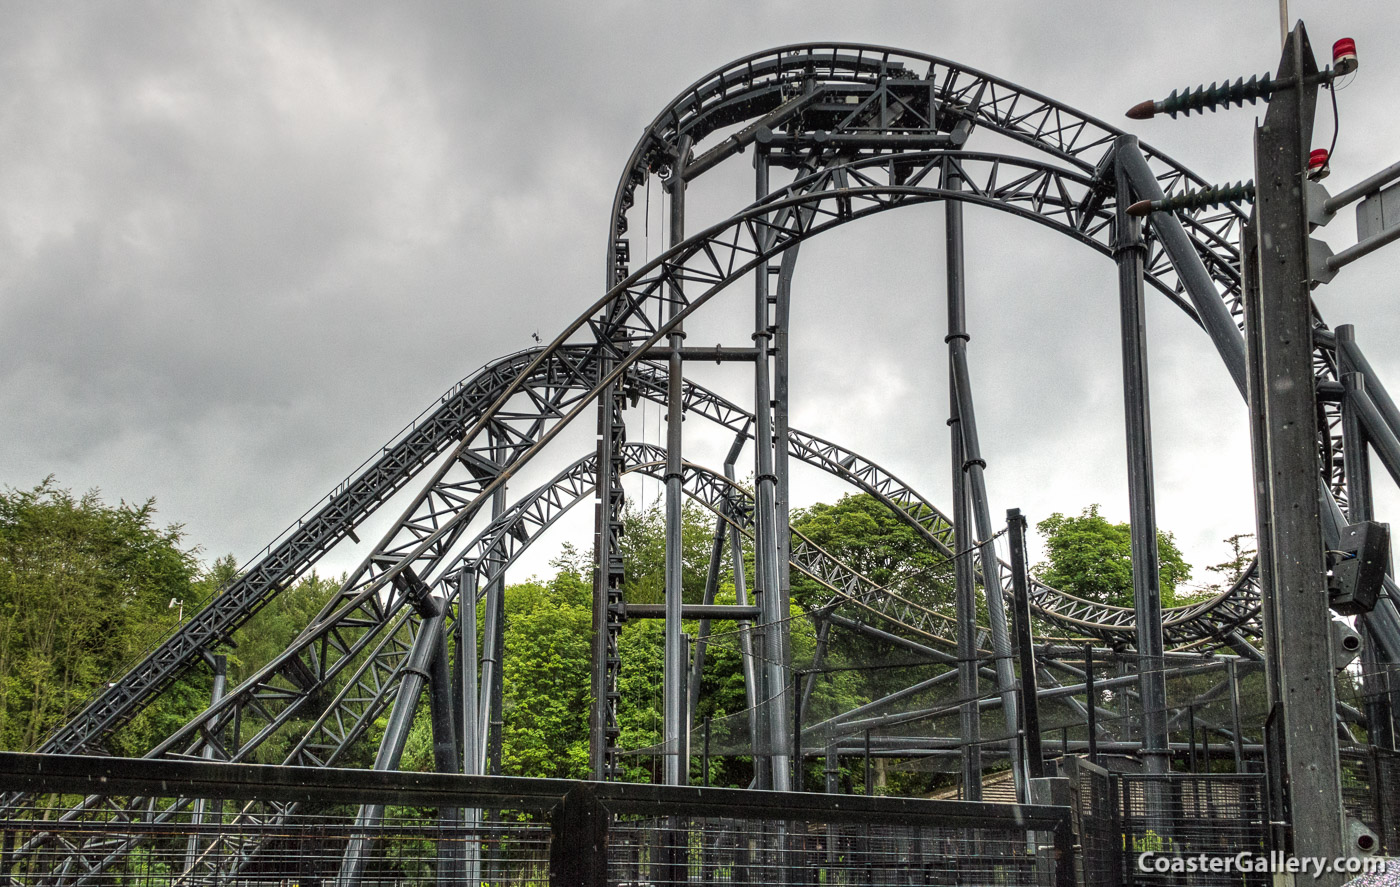 Lift hills on the Smiler roller coaster at Alton Towers